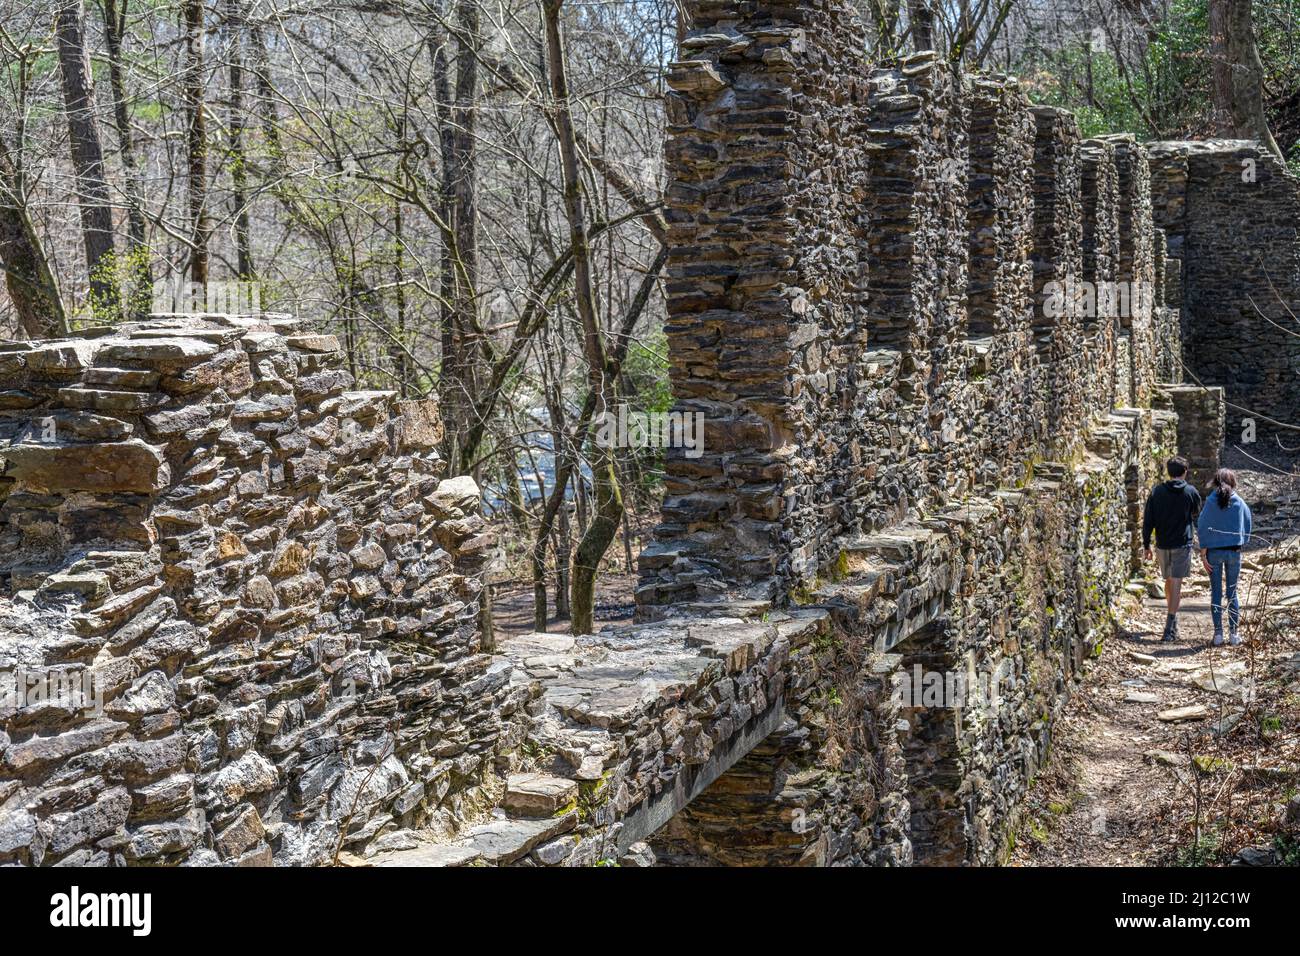 A young couple exploring the Sope Creek Mill Ruins, a part of the Chattahoochee River National Recreation Area, in Marietta, Georgia. (USA) Stock Photo